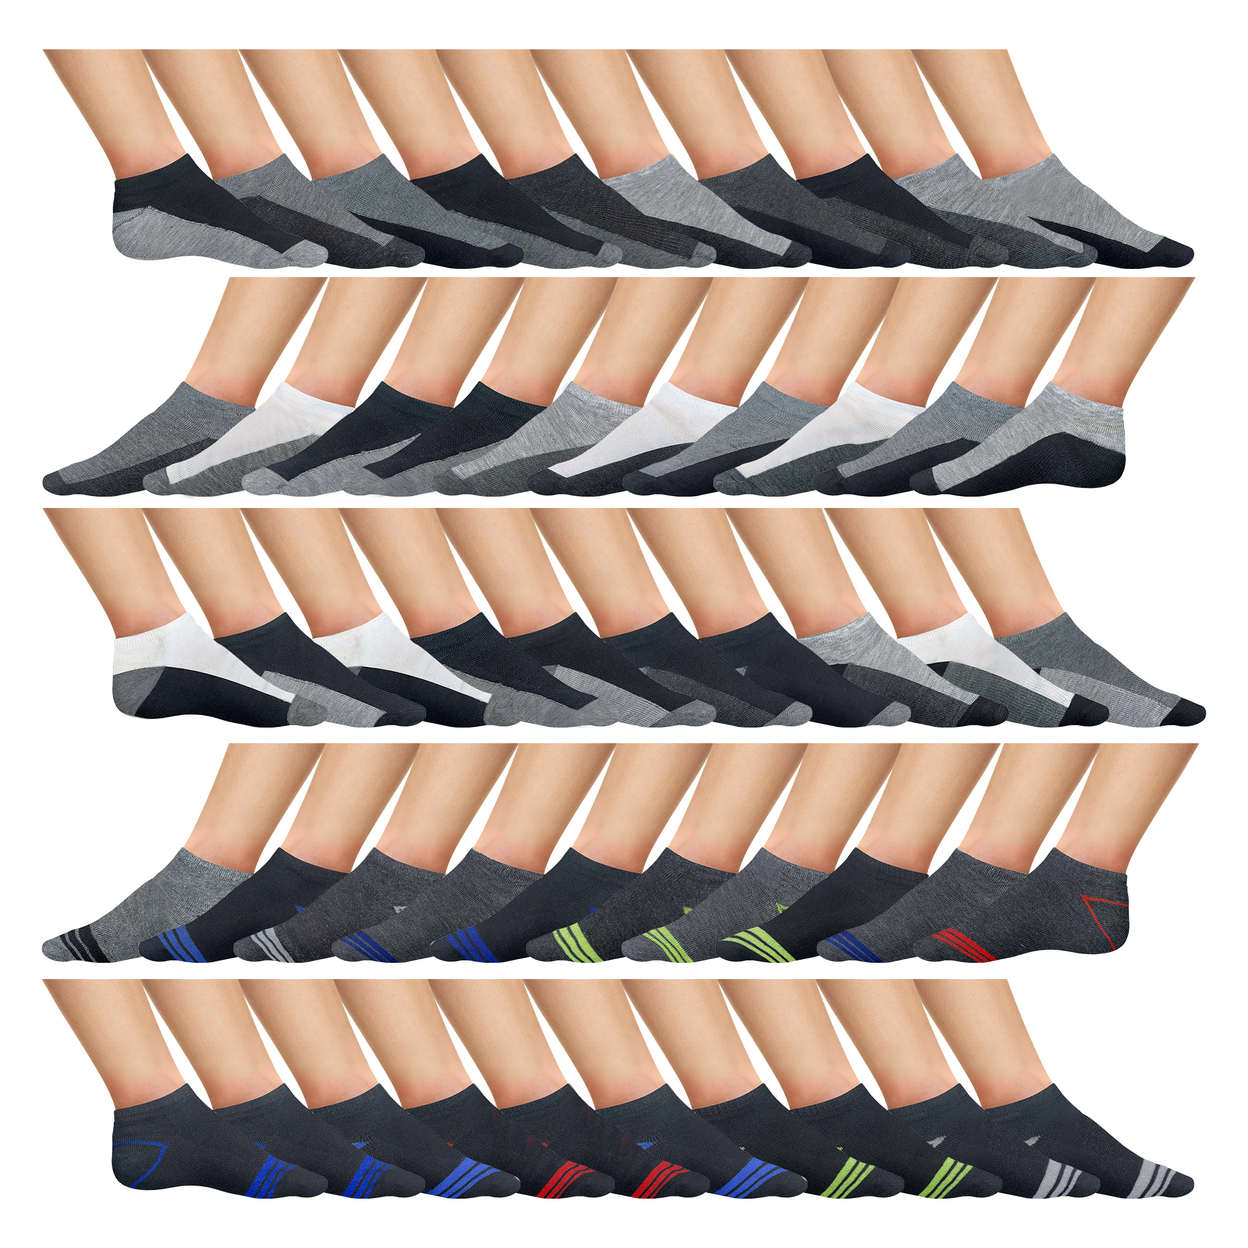 10/20-Pairs: Men's Moisture Wicking Performance Mesh Running Active Low-Cut Athletic Ankle Socks - 10-pairs